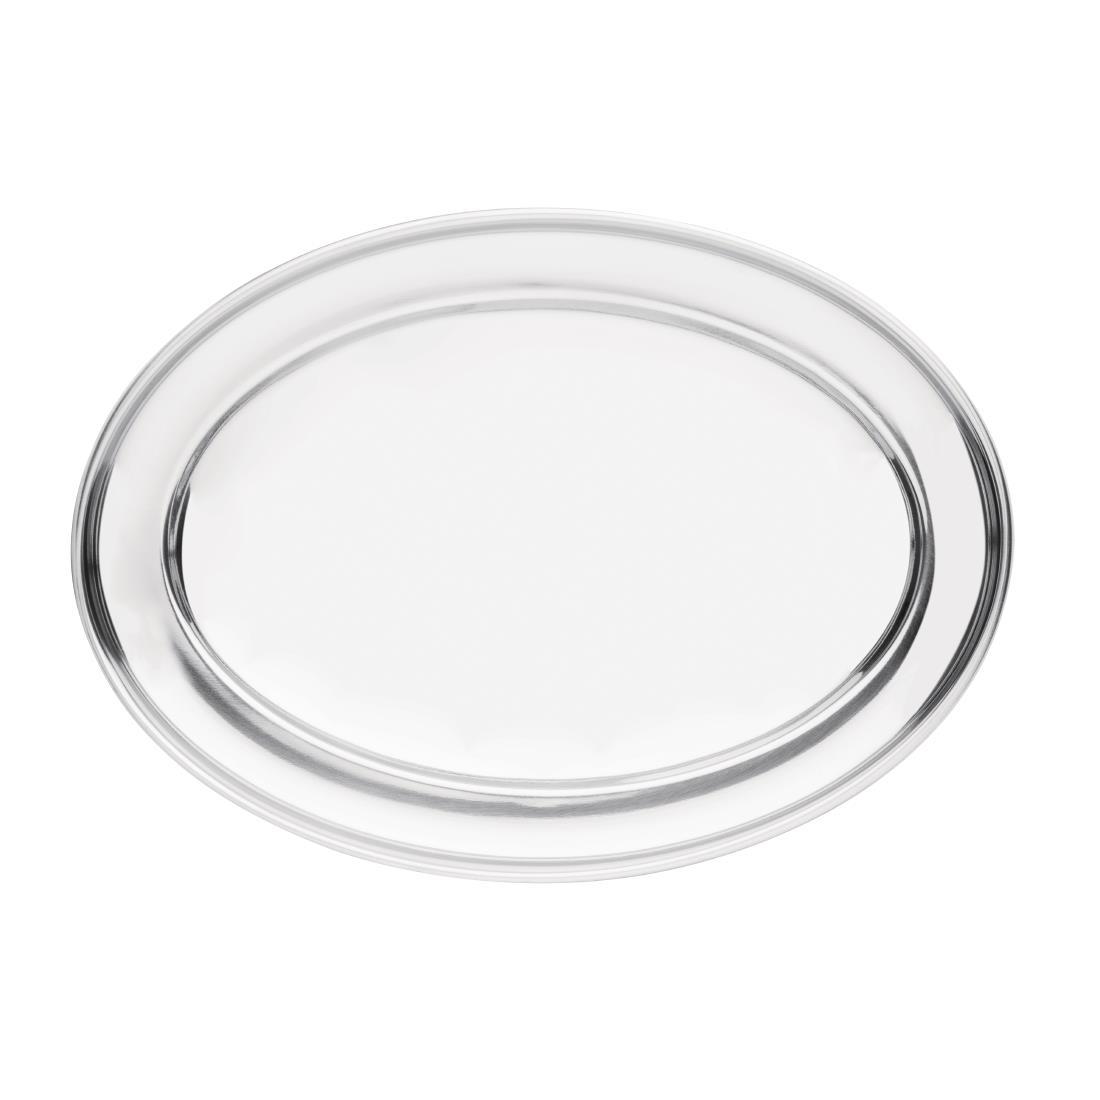 Olympia Stainless Steel Oval Serving Tray 220mm - K361  - 4